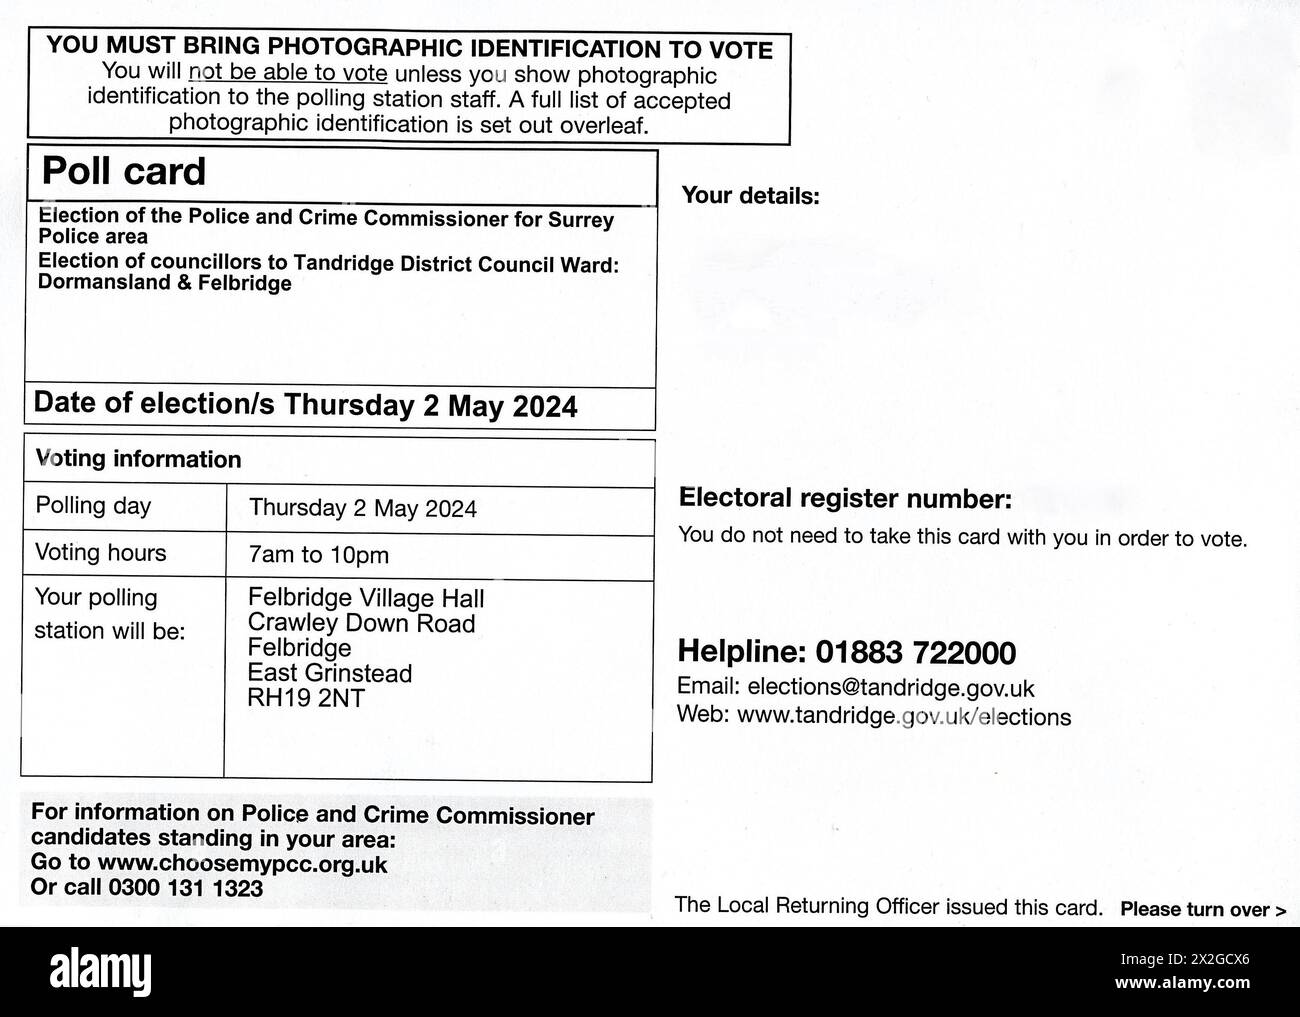 Poll card for British local Government elections to be held on May 2, 2024. Card shown is for the Police and Crime Commissioner for Surrey and for the Dormansland and Felbridge ward for Tandridge District Council. Stock Photo